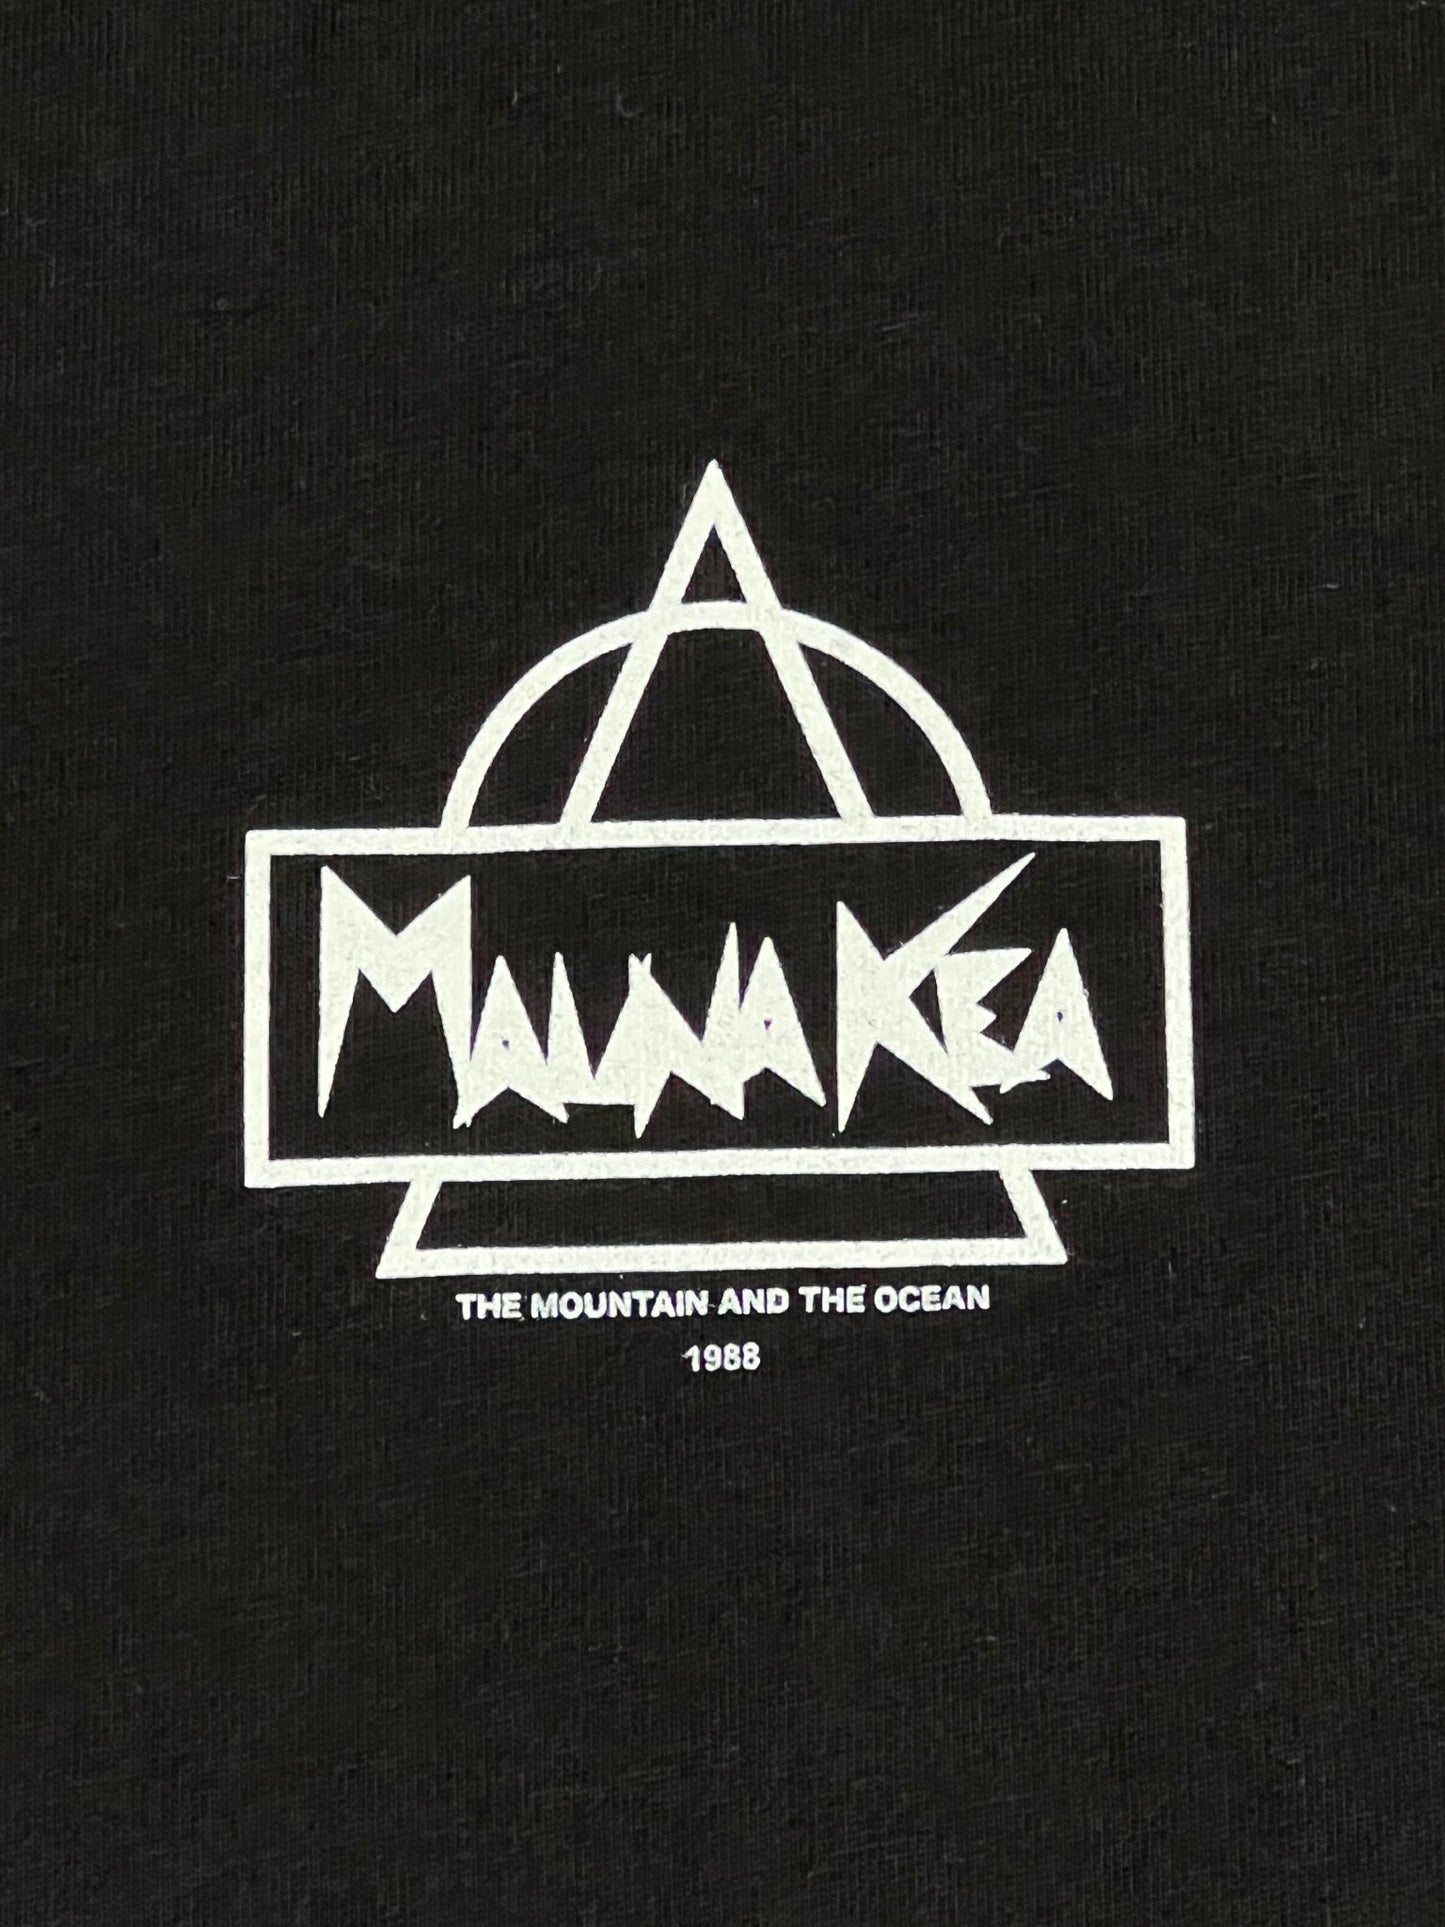 MAUNA-KEA MKE100-999 HERITAGE TEE W SCREEN PRINT BLK featuring a white graphic of a stylized mountain peak and ocean waves with the text "Maunakea - the mountain and the ocean 1988" on a black background. Made of 100% Cotton.